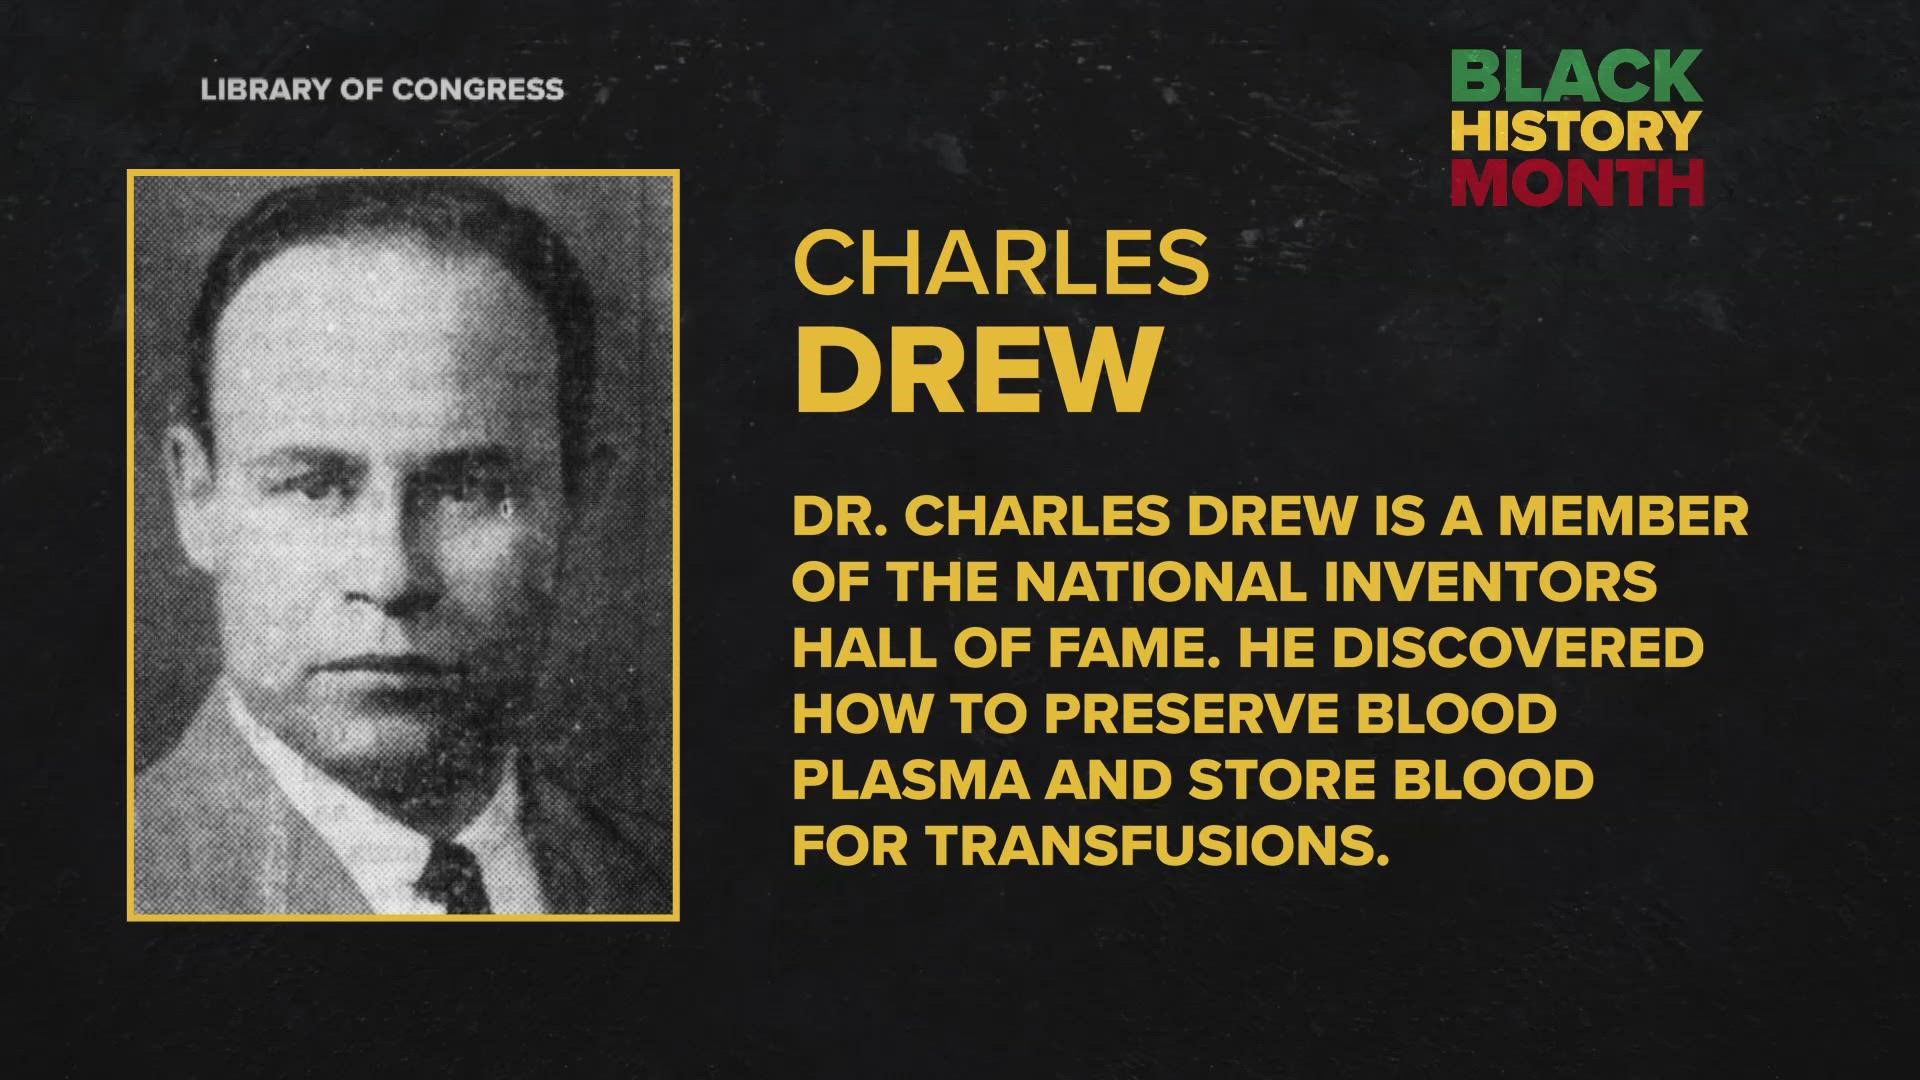 Charles Drew is a member of the National Inventors Hall of Fame. He discovered how to preserve blood plasma and store blood for transfusions.